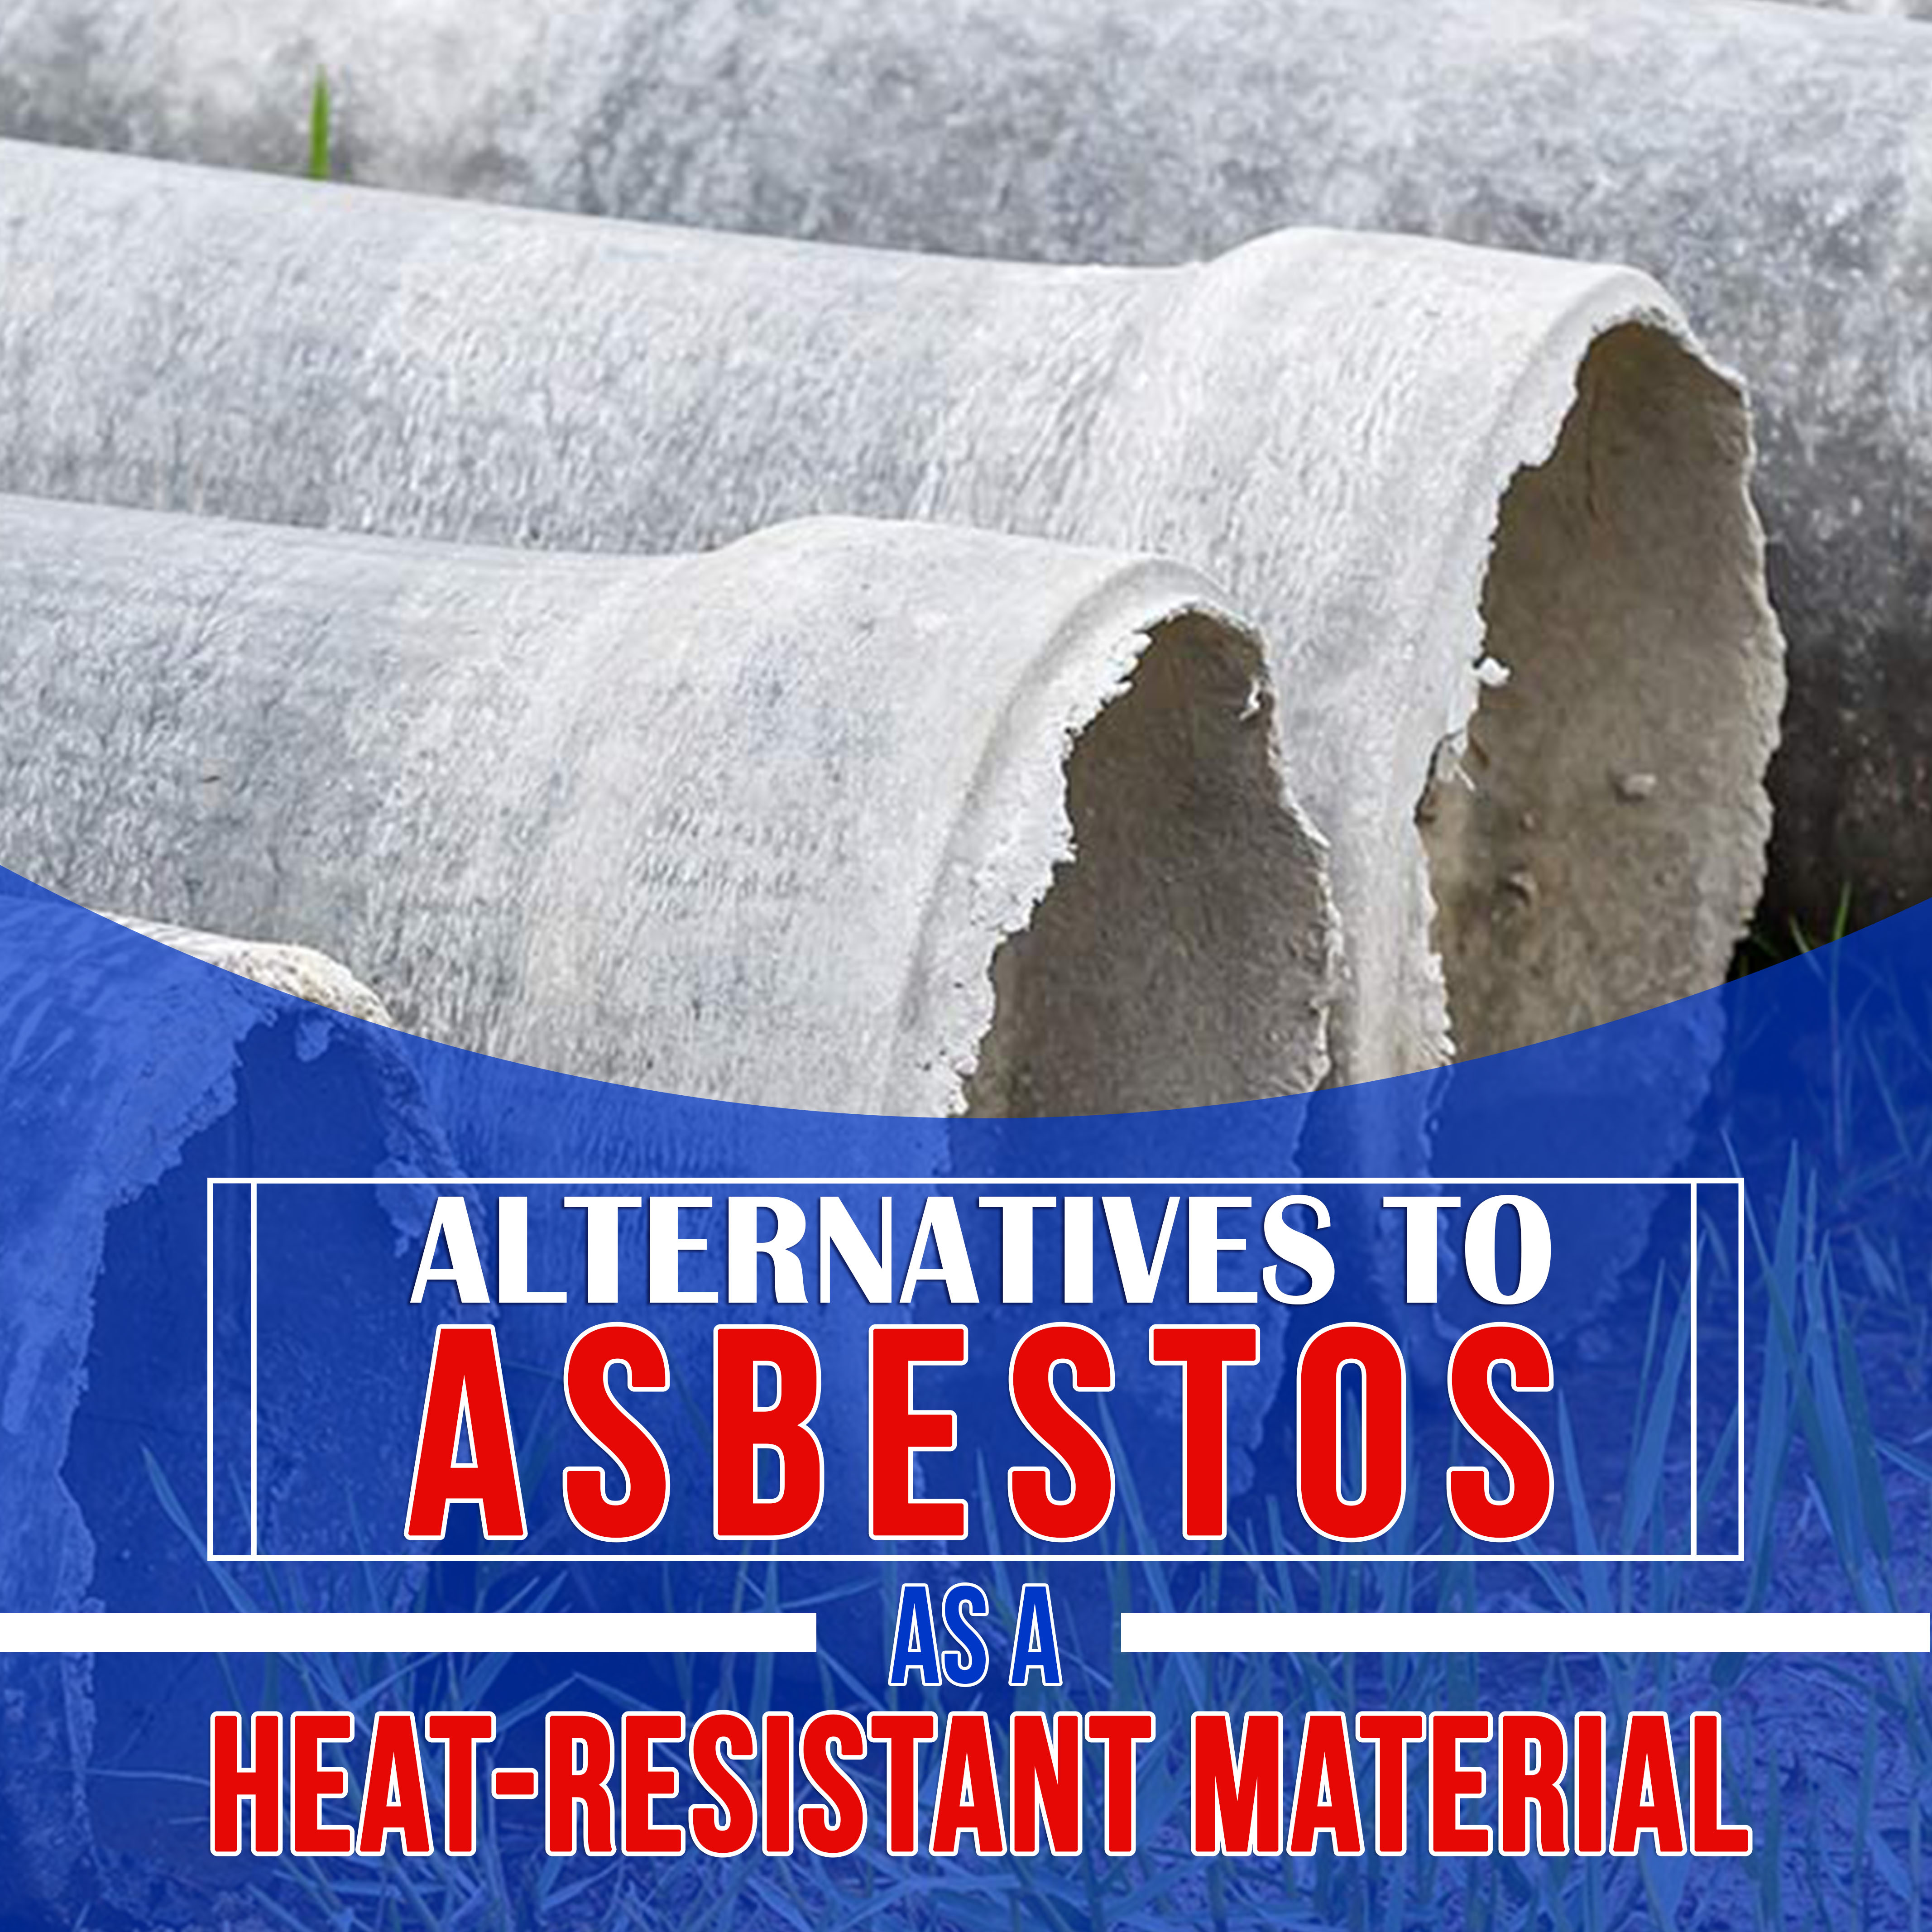 6 Alternatives to Asbestos as a Heat-Resistant Material